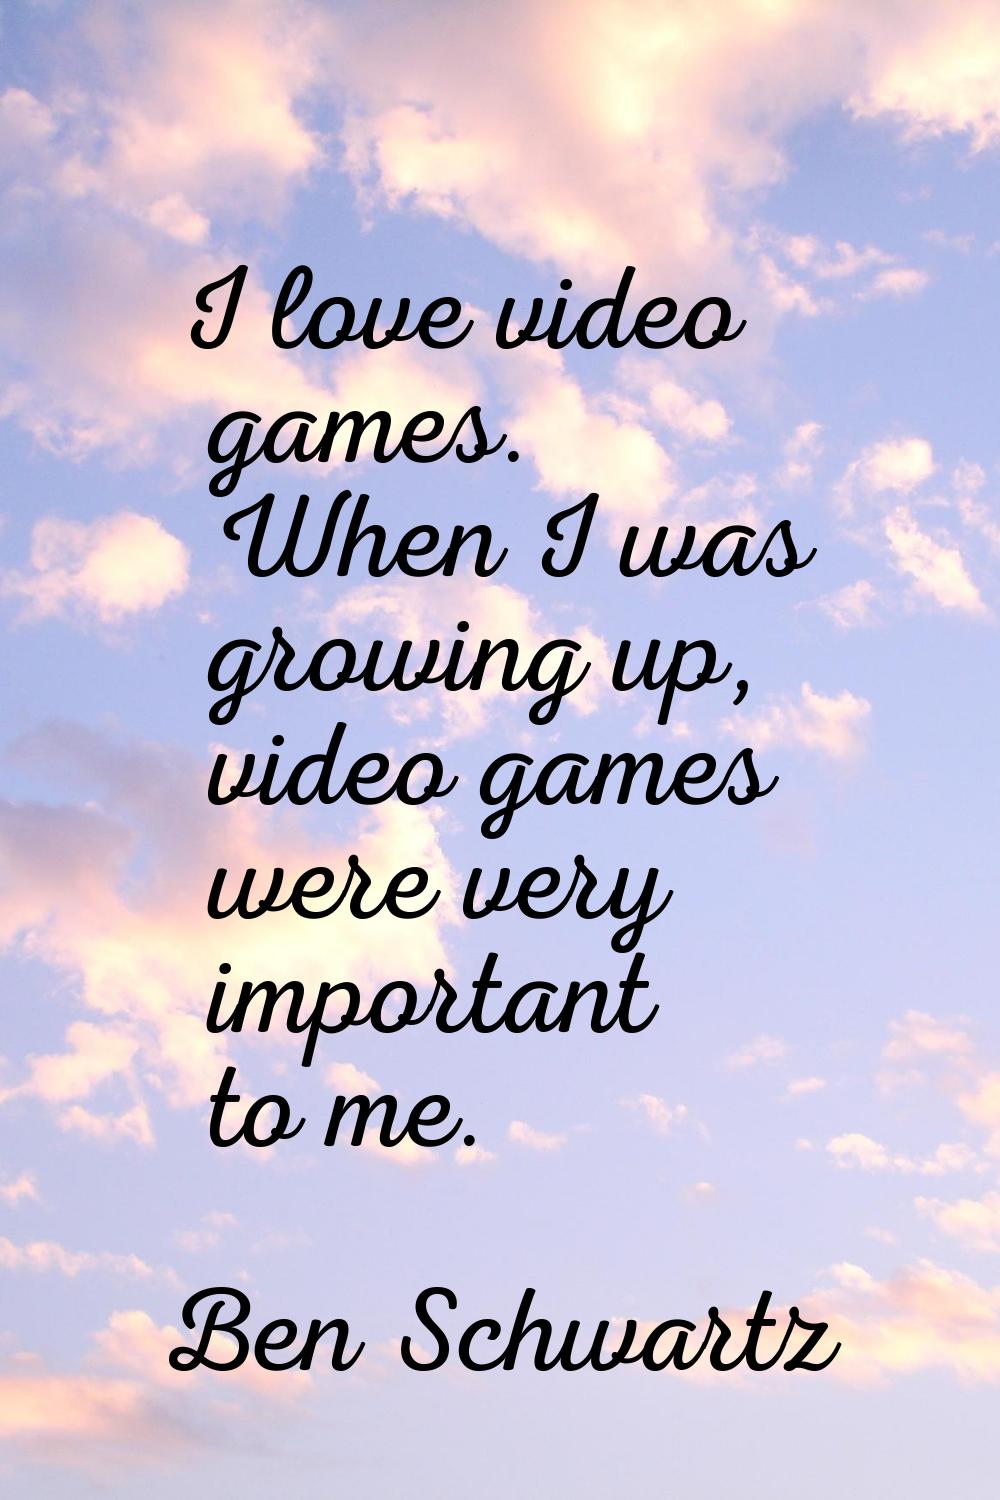 I love video games. When I was growing up, video games were very important to me.